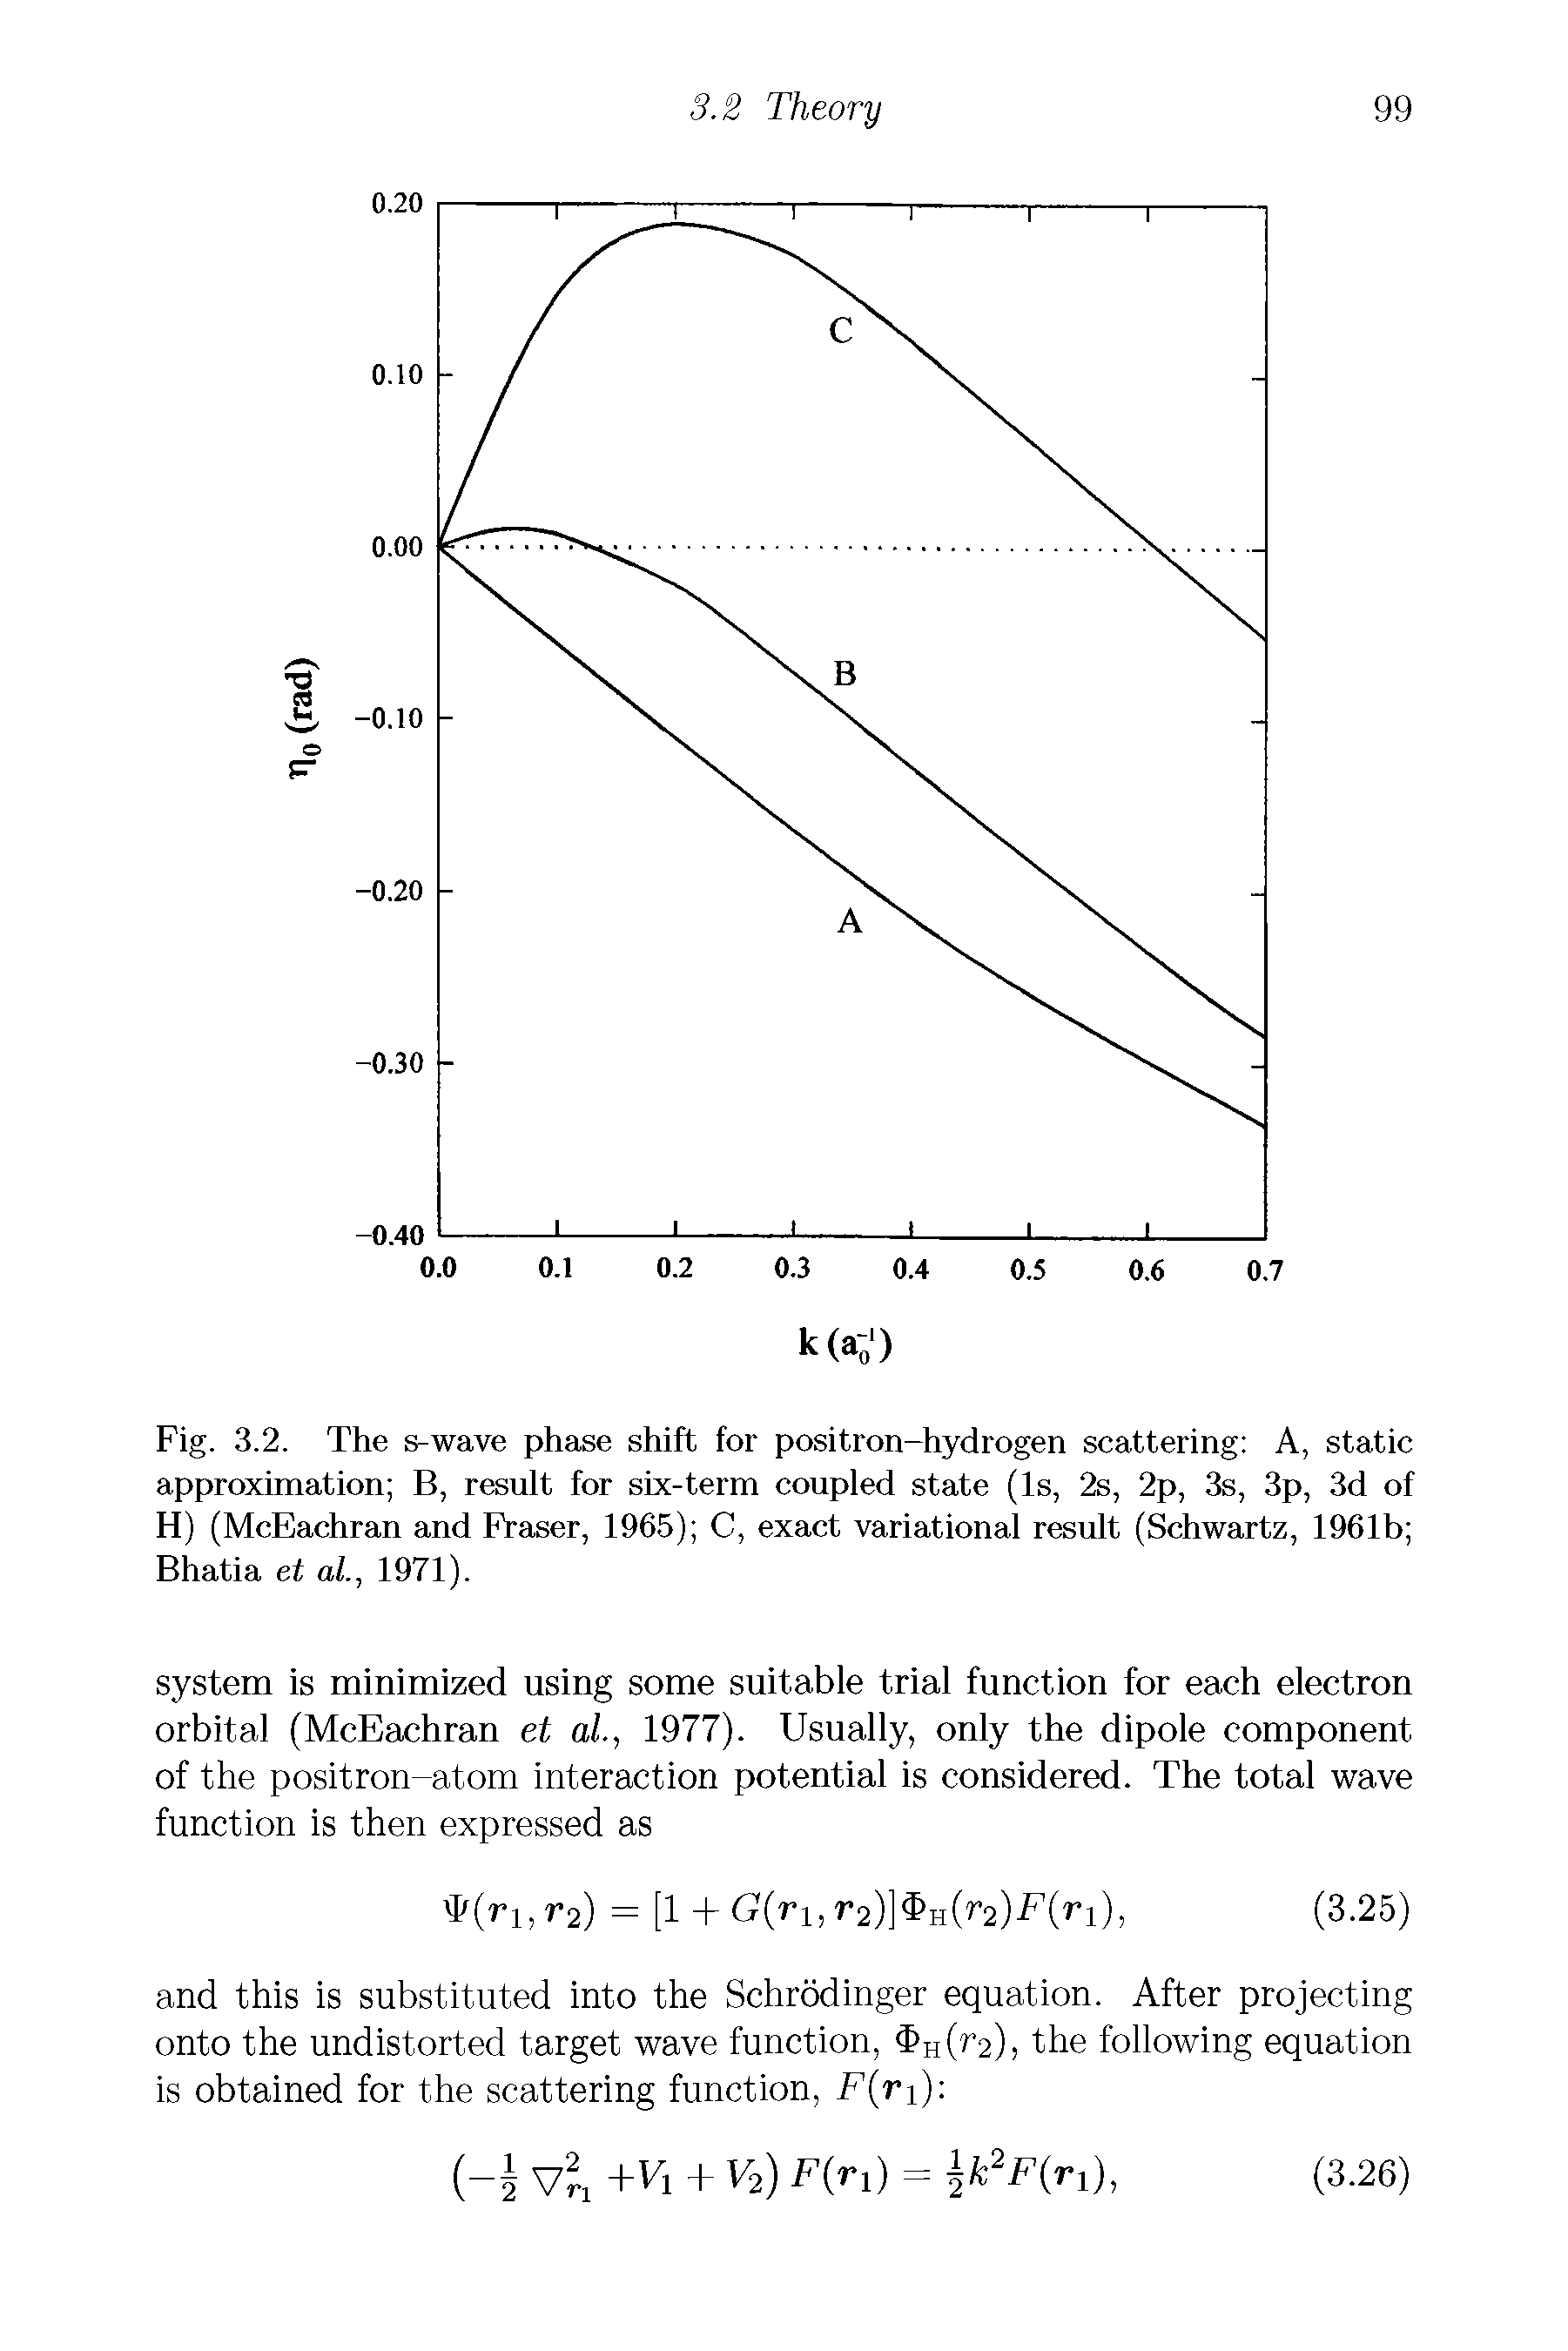 Fig. 3.2. The s-wave phase shift for positron-hydrogen scattering A, static approximation B, result for six-term coupled state (Is, 2s, 2p, 3s, 3p, 3d of H) (McEachran and Fraser, 1965) C, exact variational result (Schwartz, 1961b Bhatia et al., 1971).